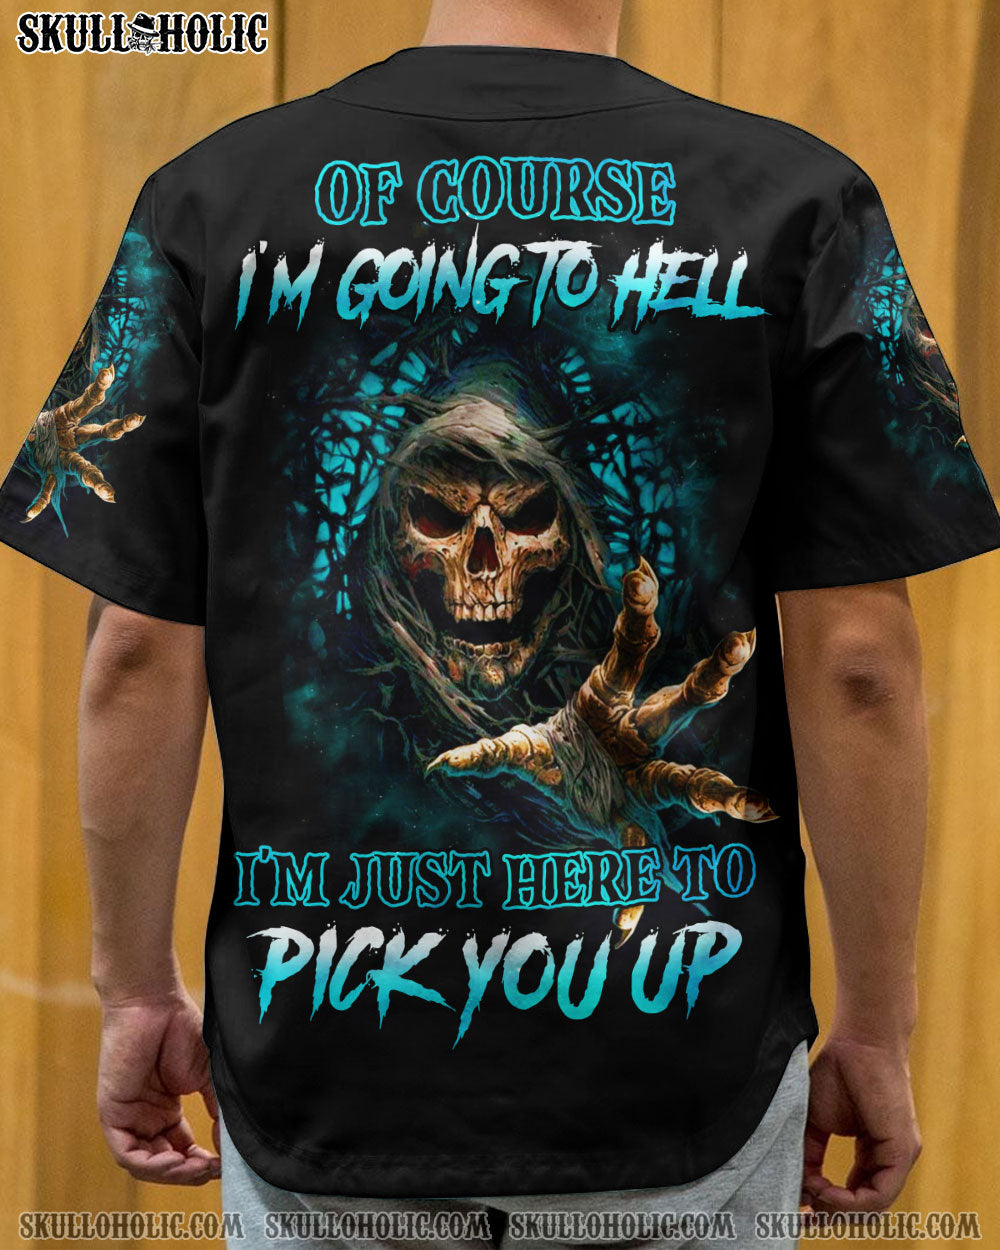 PERSONALIZED OF COURSE I'M GOING TO HELL SKULL BASEBALL JERSEY - YHHN1008224